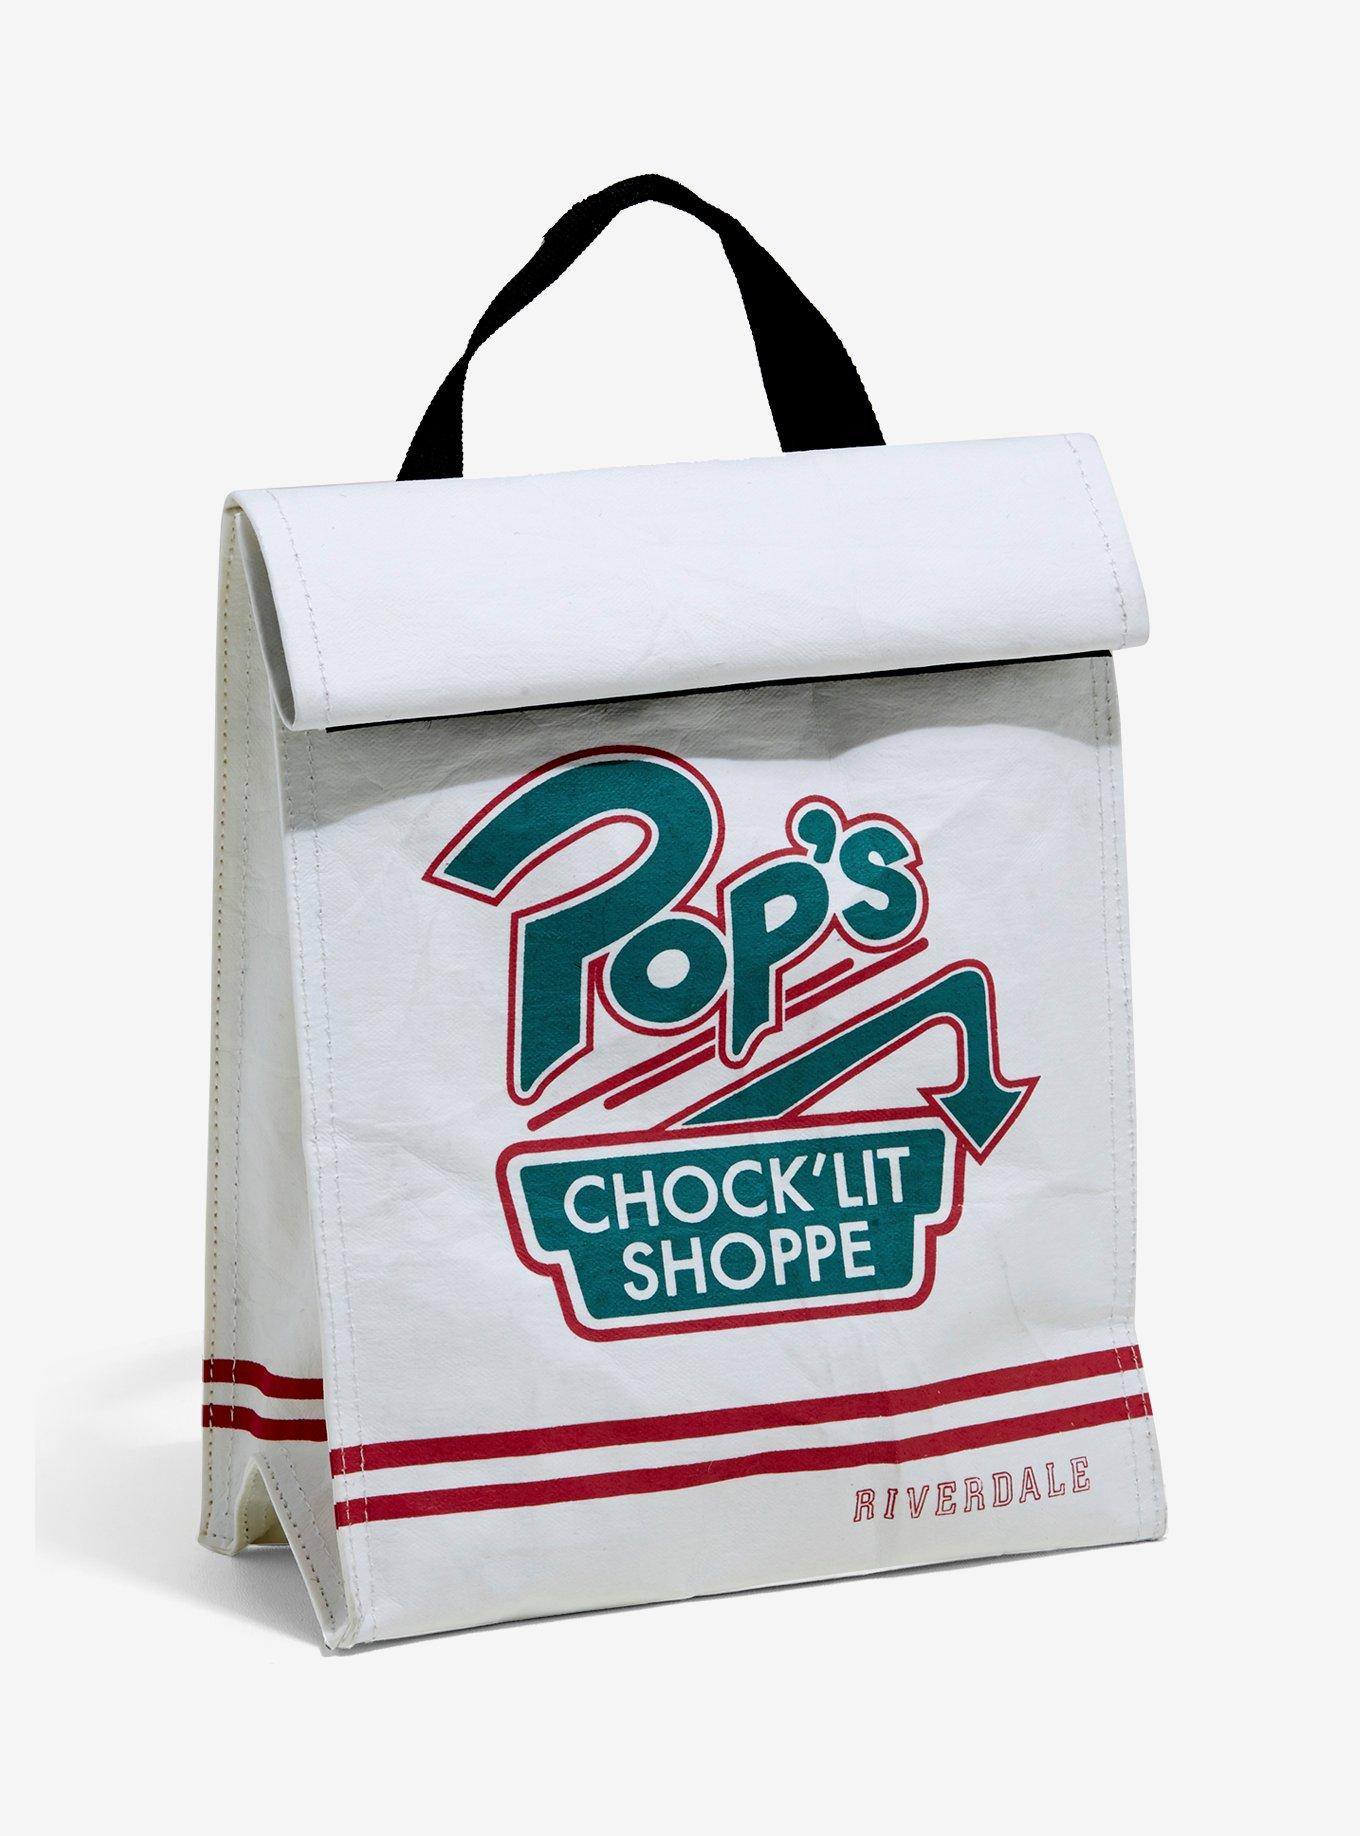 Riverdale Pop's Chock'Lit Shoppe Insulated Lunch Sack Hot Topic Exclusive, , hi-res